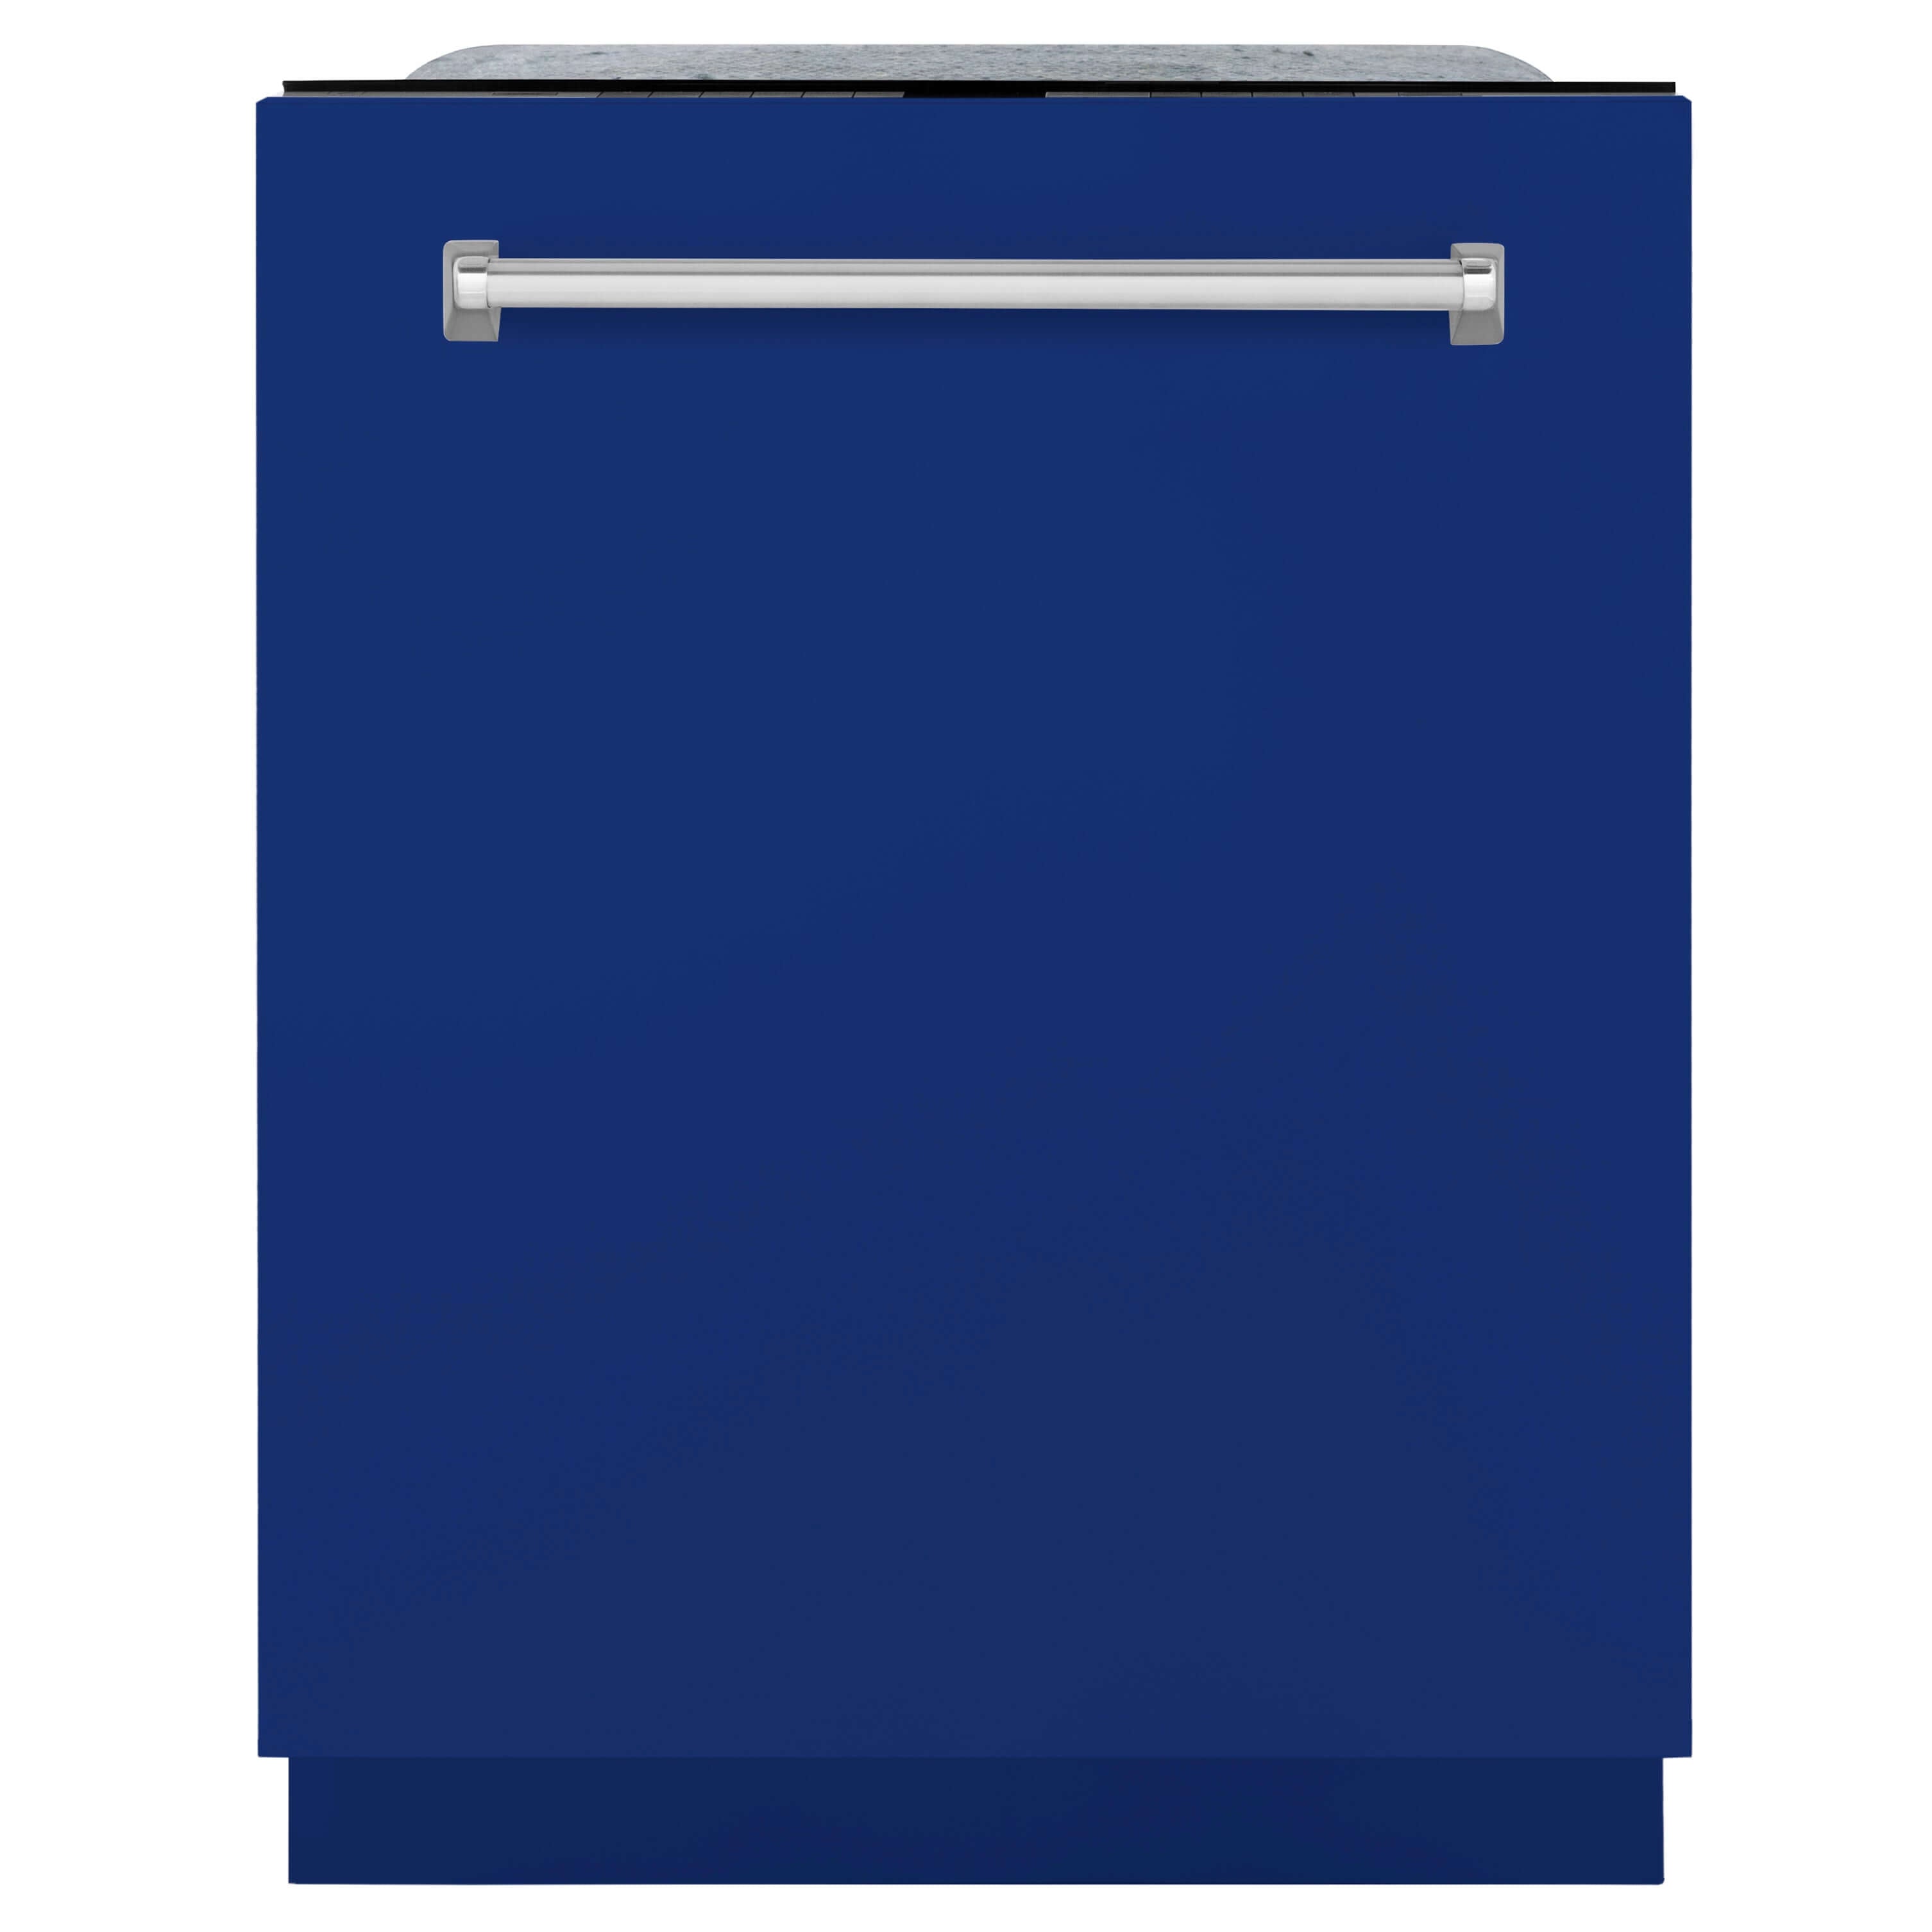 ZLINE 24 in. Panel-Included Monument Series 3rd Rack Top Touch Control Dishwasher with Blue Gloss and Stainless Steel Tub, 45dBa (DWMT-24-BG)